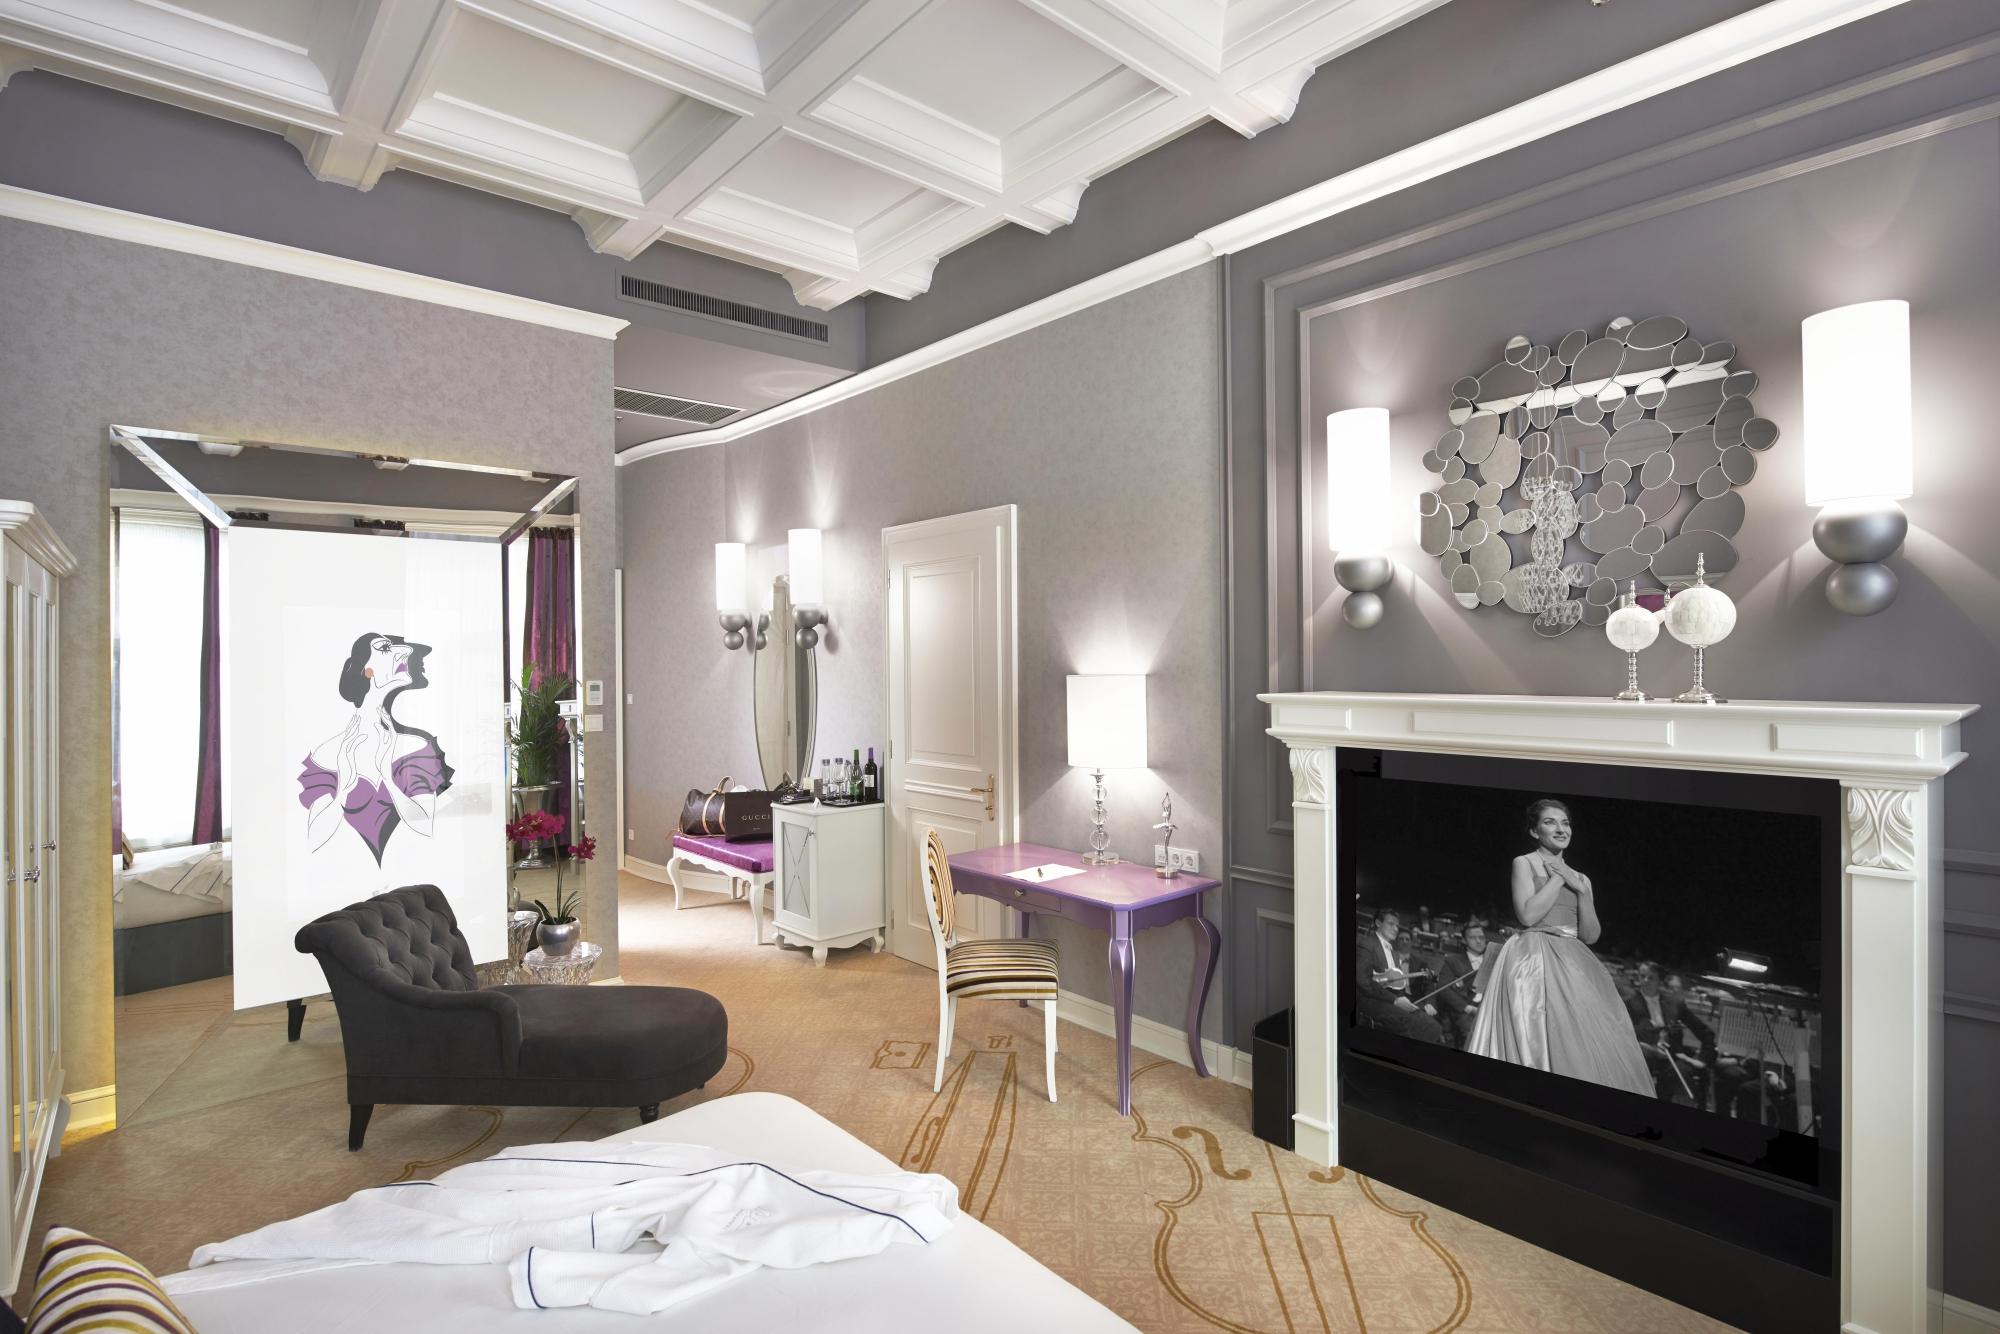 Hotel photo 1 of Aria Hotel Budapest by Library Hotel Collection.